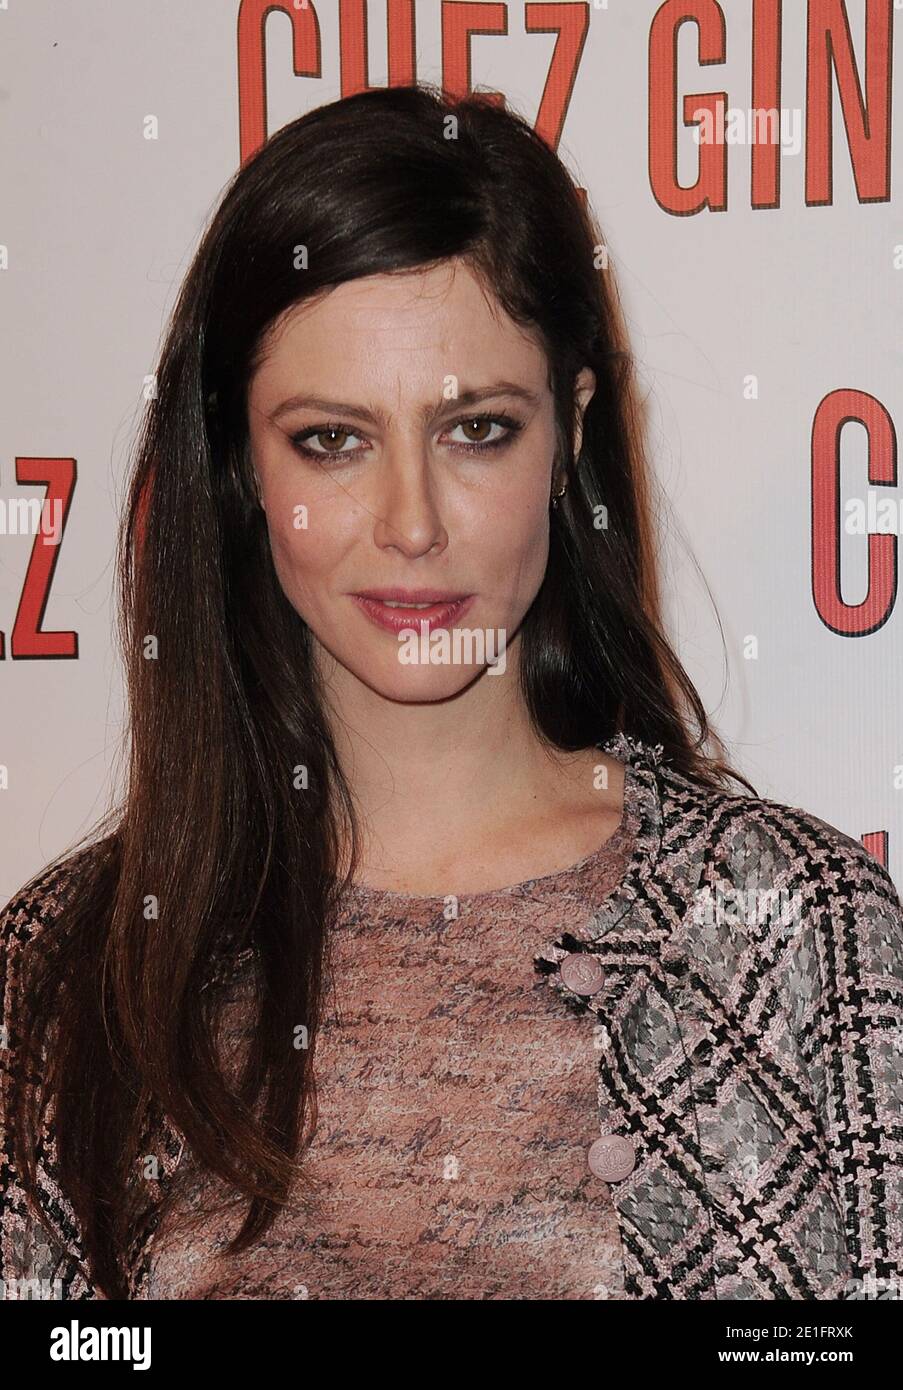 Anna Mouglalis attends the premiere of 'Chez Gino' at Cinema Gaumont Opera in Paris, France on March 29, 2011. Photo by Giancarlo Gorassini/ABACAPRESS.COM Stock Photo